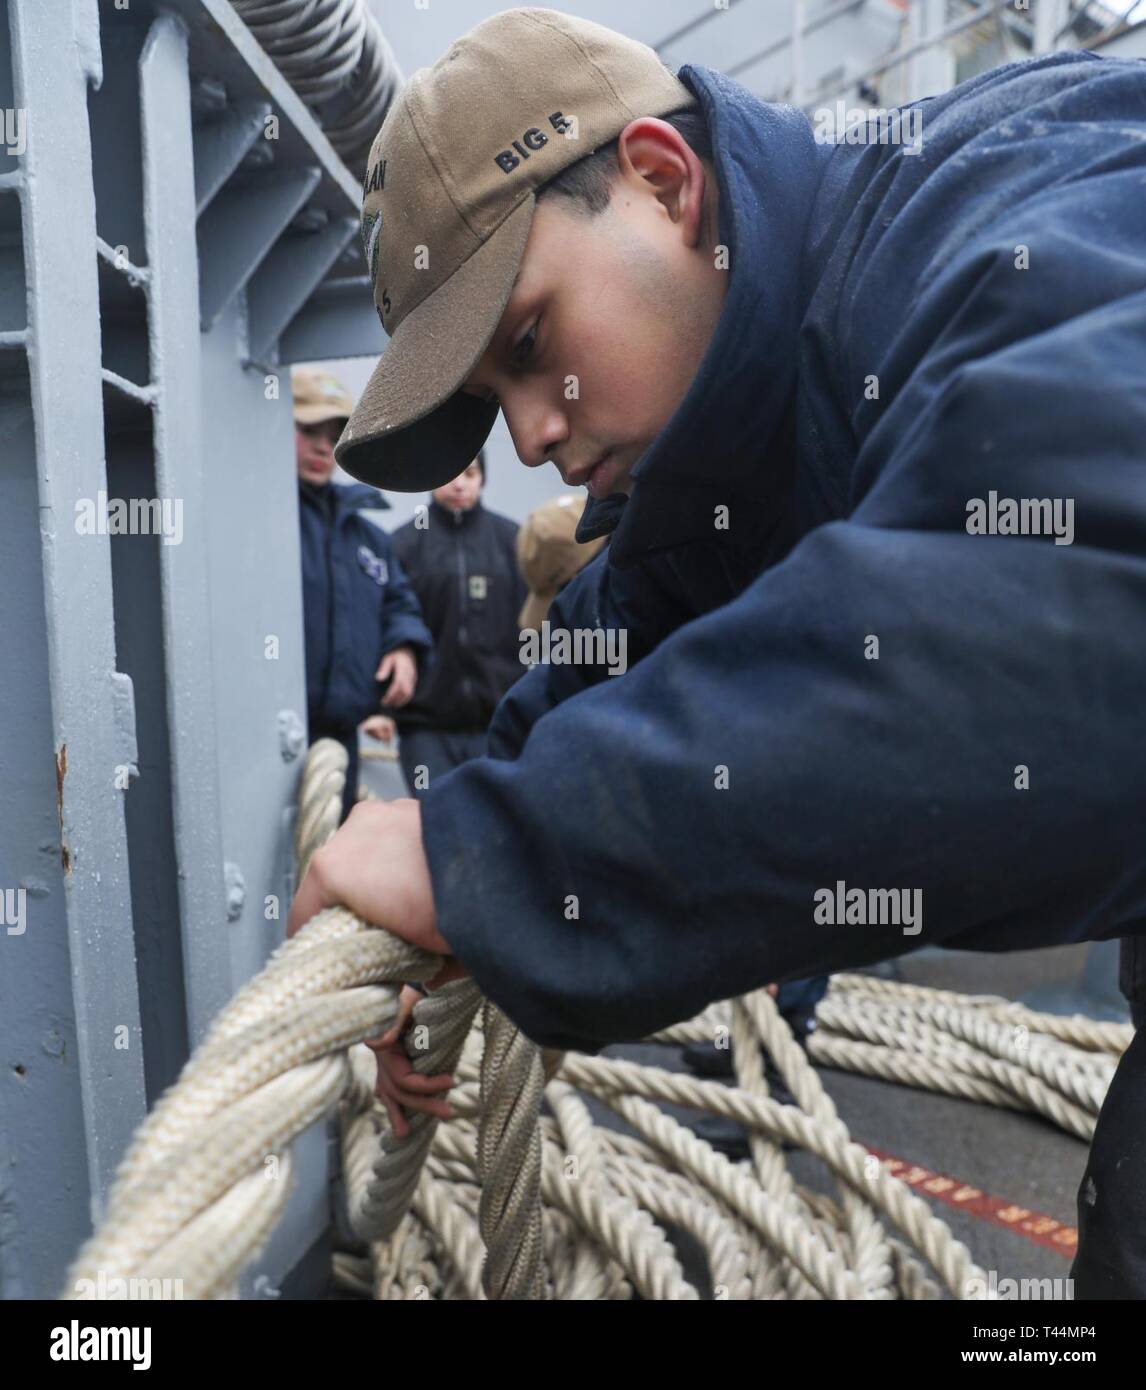 NORFOLK, Va. (Feb. 20, 2019) Seaman Matthew Luera helps fake down mooring lines during a sea and anchor evolution on the fantail aboard the amphibious assault ship USS Bataan (LHD 5). The ship is underway conducting sea trials. Stock Photo